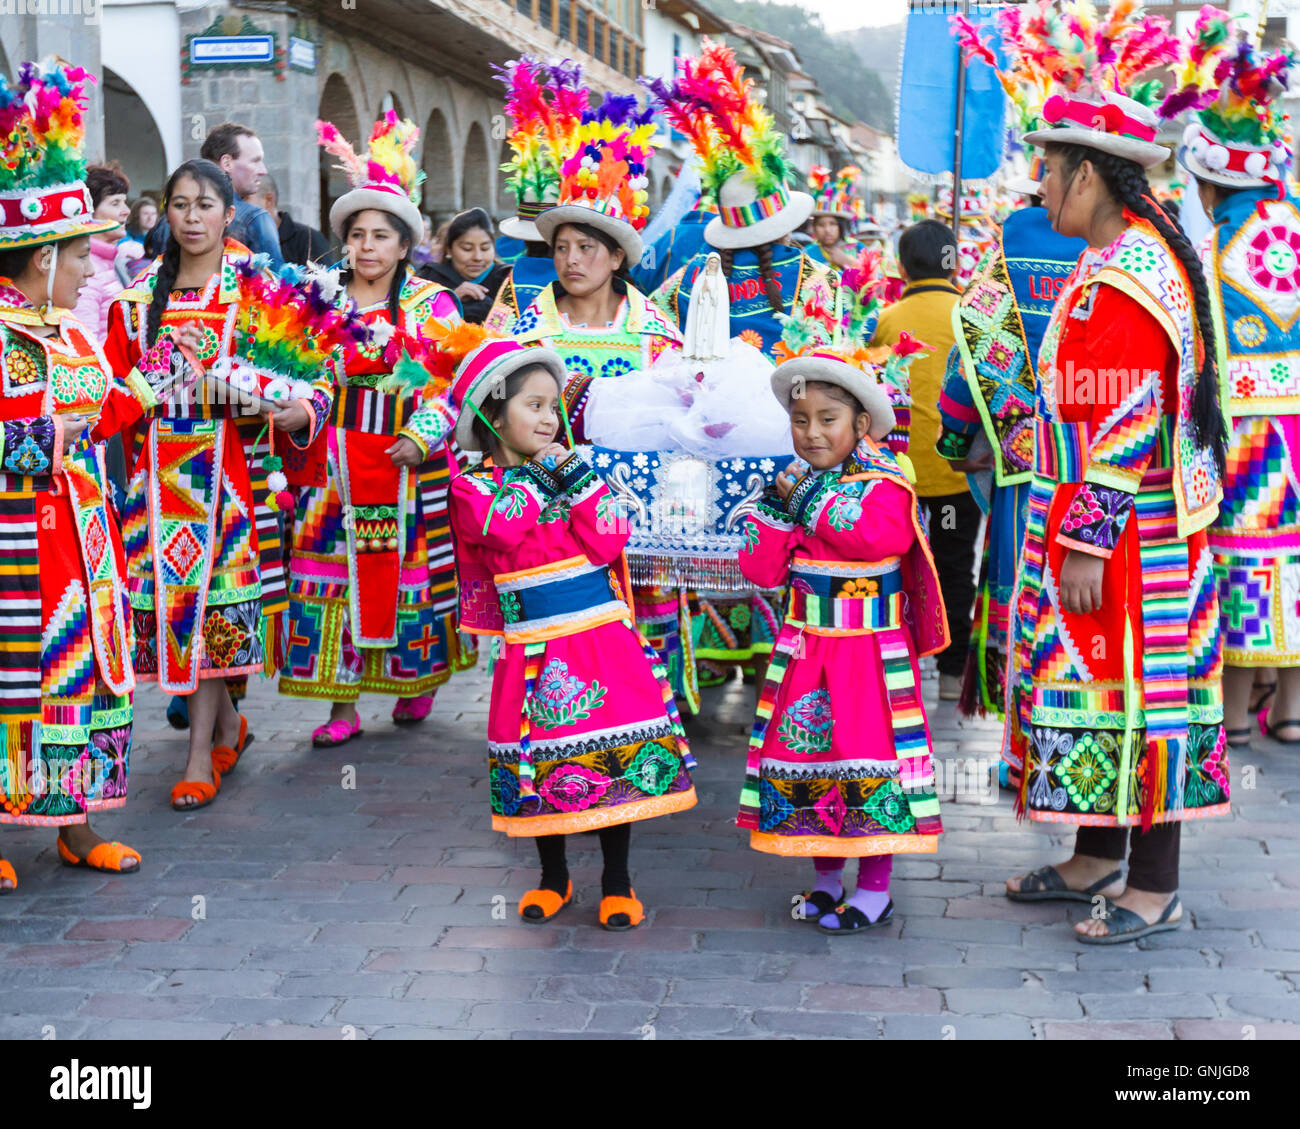 Cusco, Peru - May 13: Native people of Cusco dressed in colorful clothing  in a religious celebration for Nuestra Señora de Fatim Stock Photo - Alamy